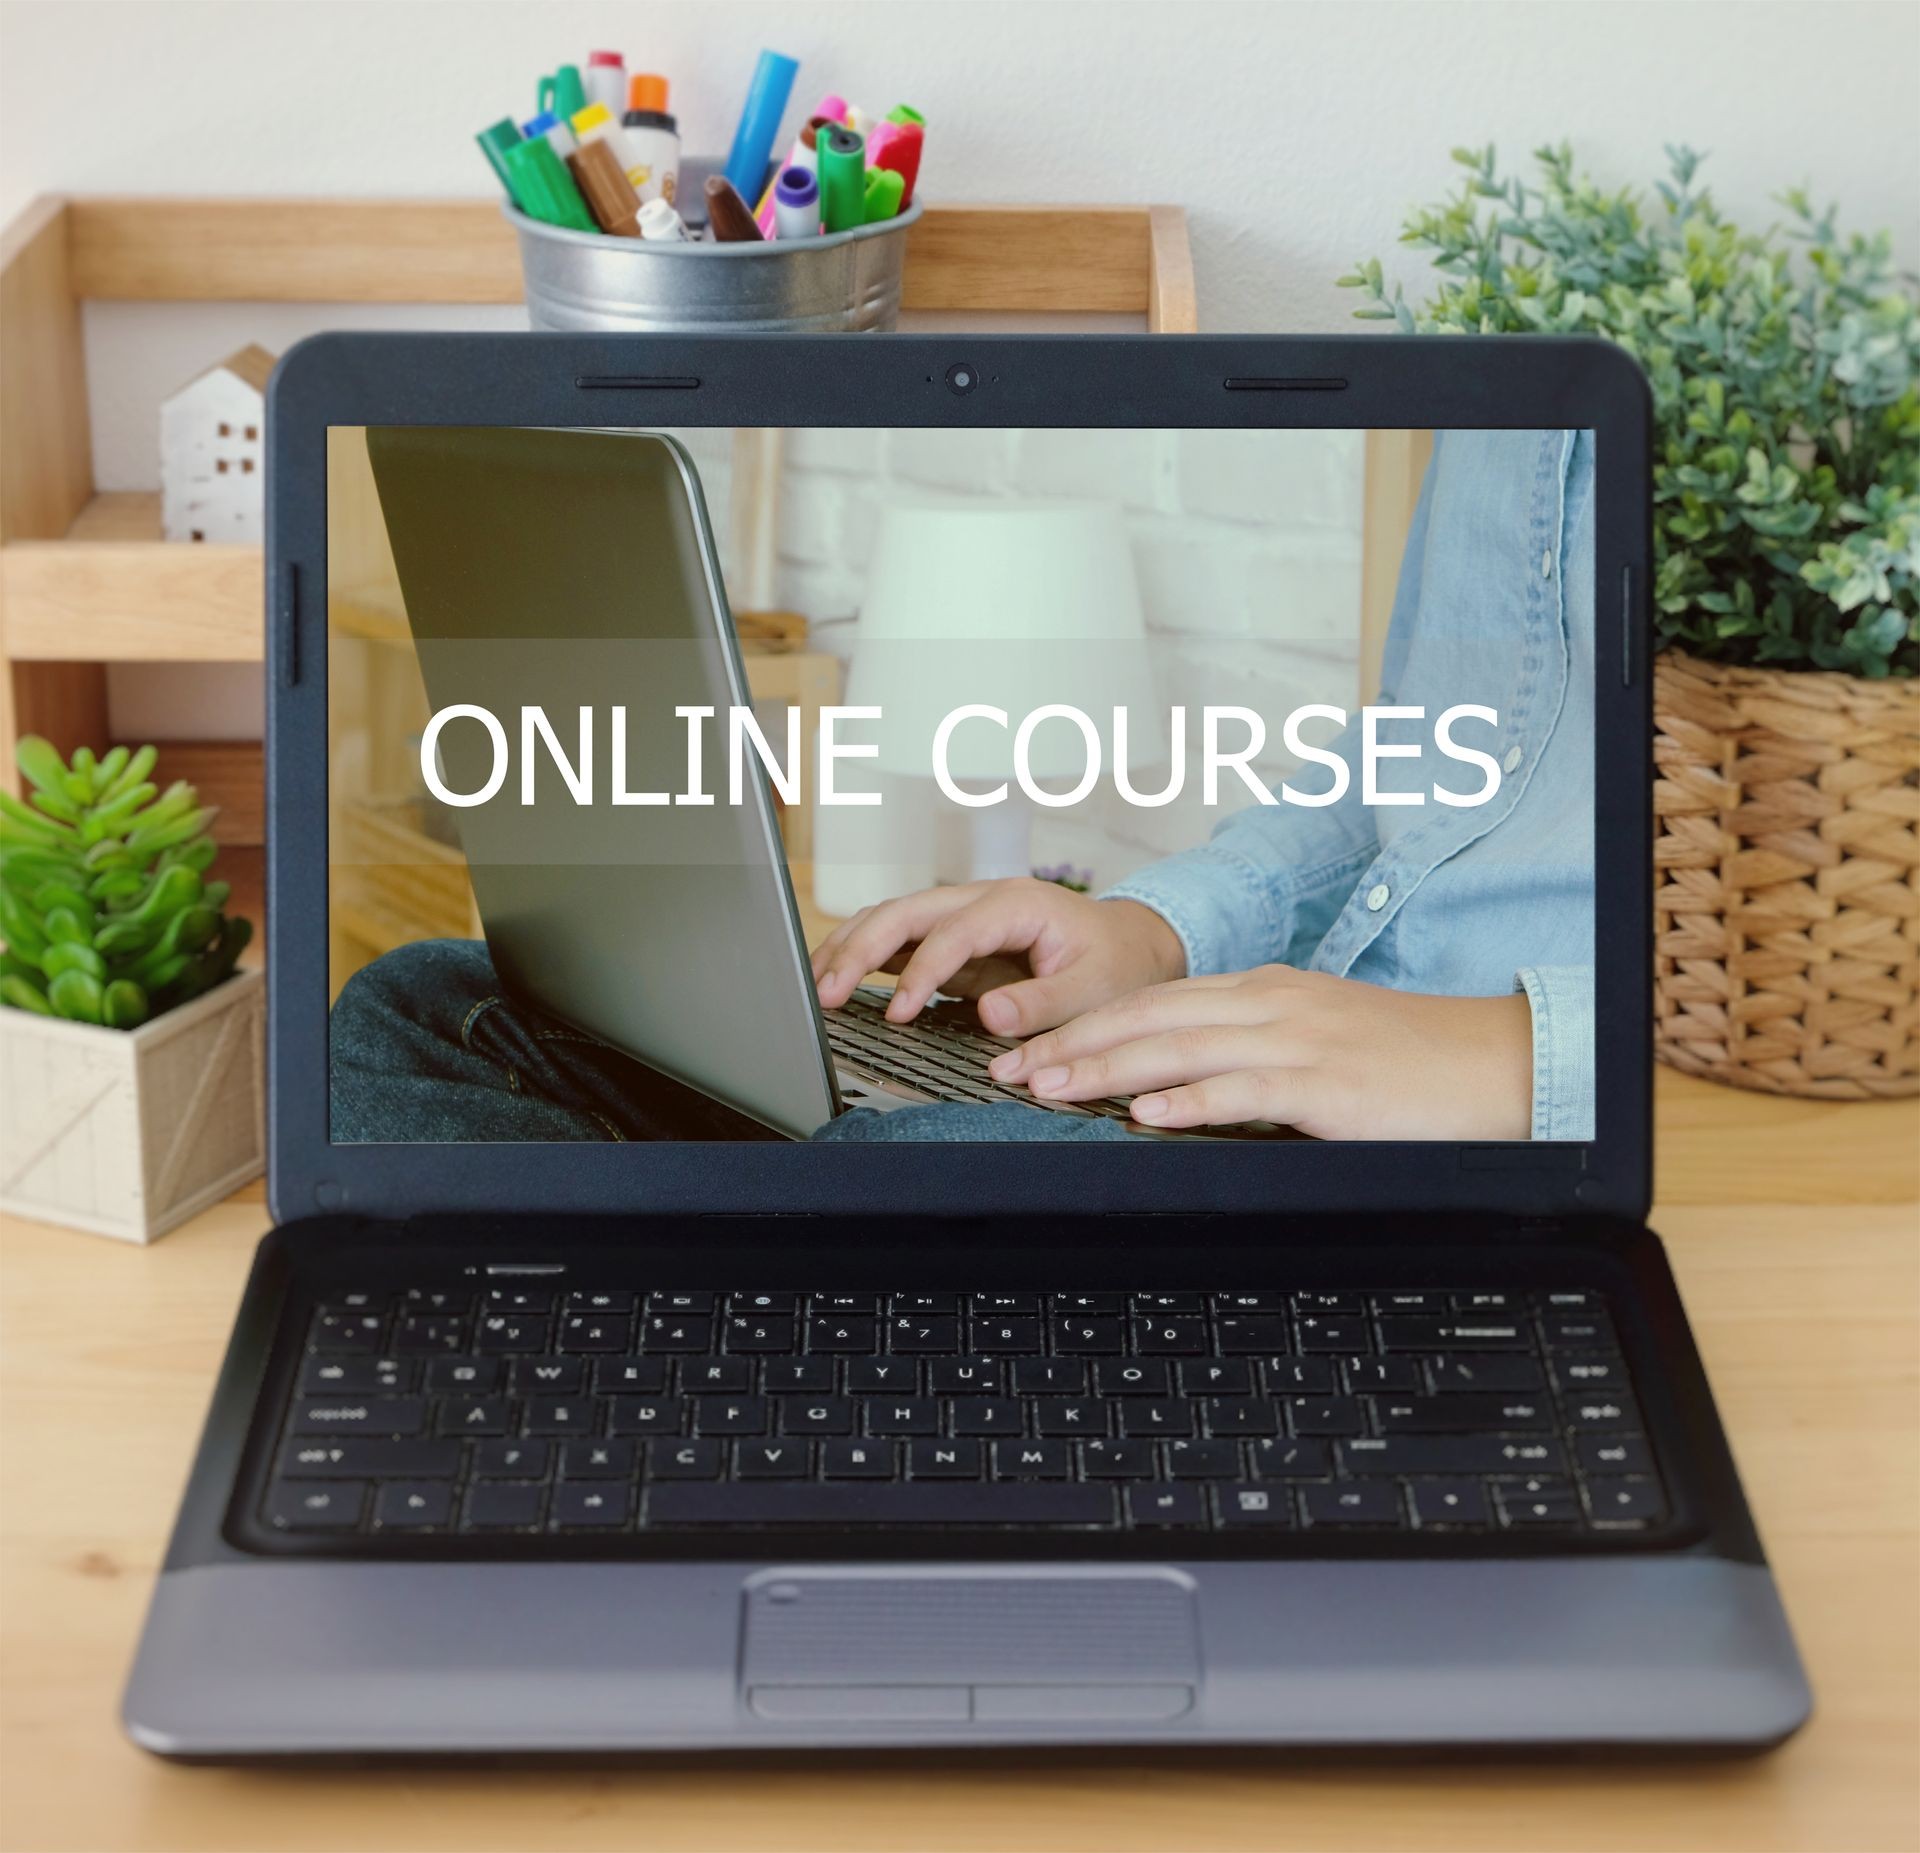 Online courses on laptop screen background, education, e-learning, technology, life style